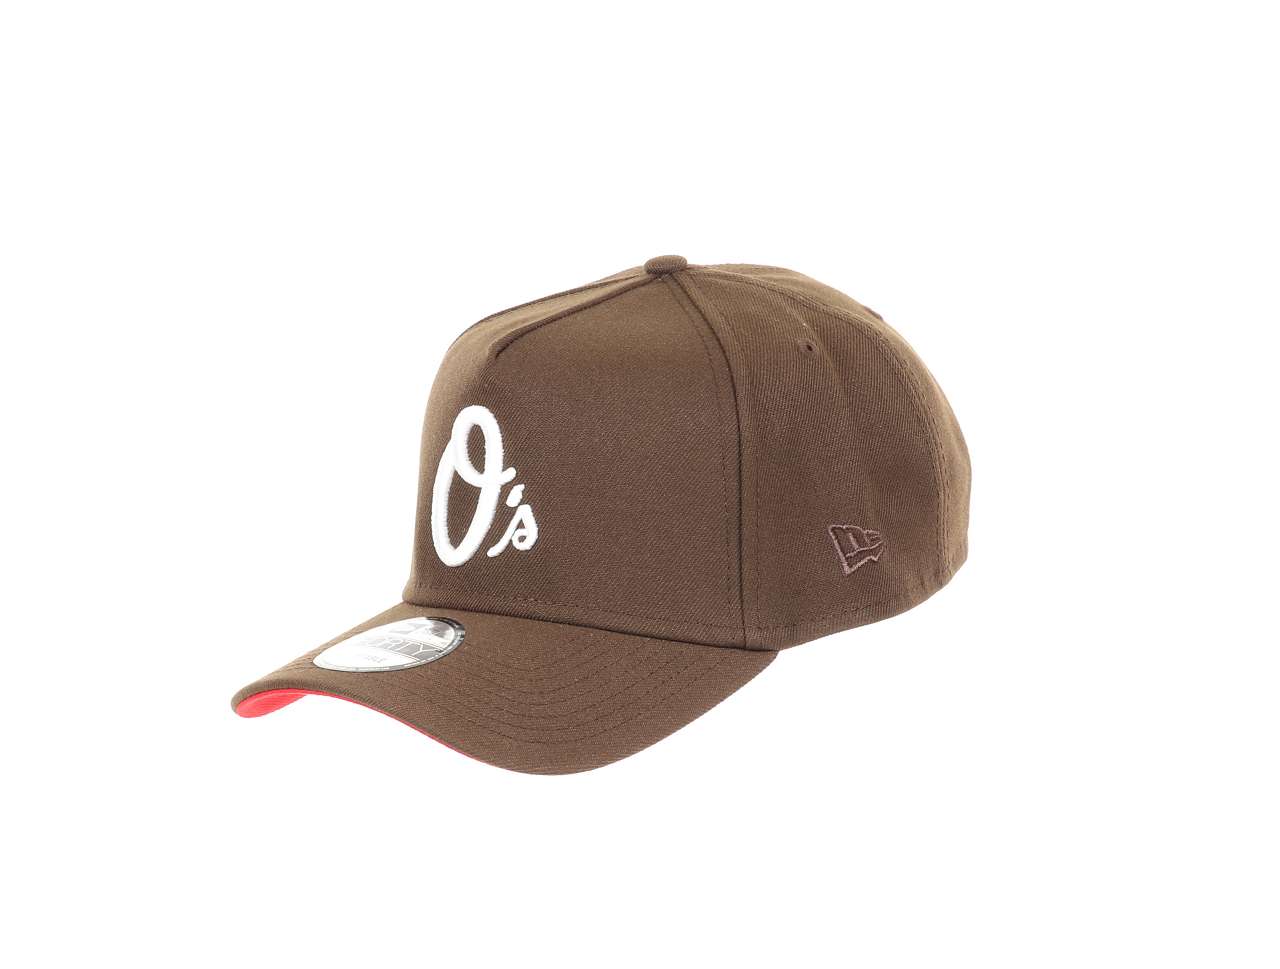 Baltimore Orioles MLB 60th Anniversary Sidepatch Walnut 9Forty A-Frame Snapback Cap New Era